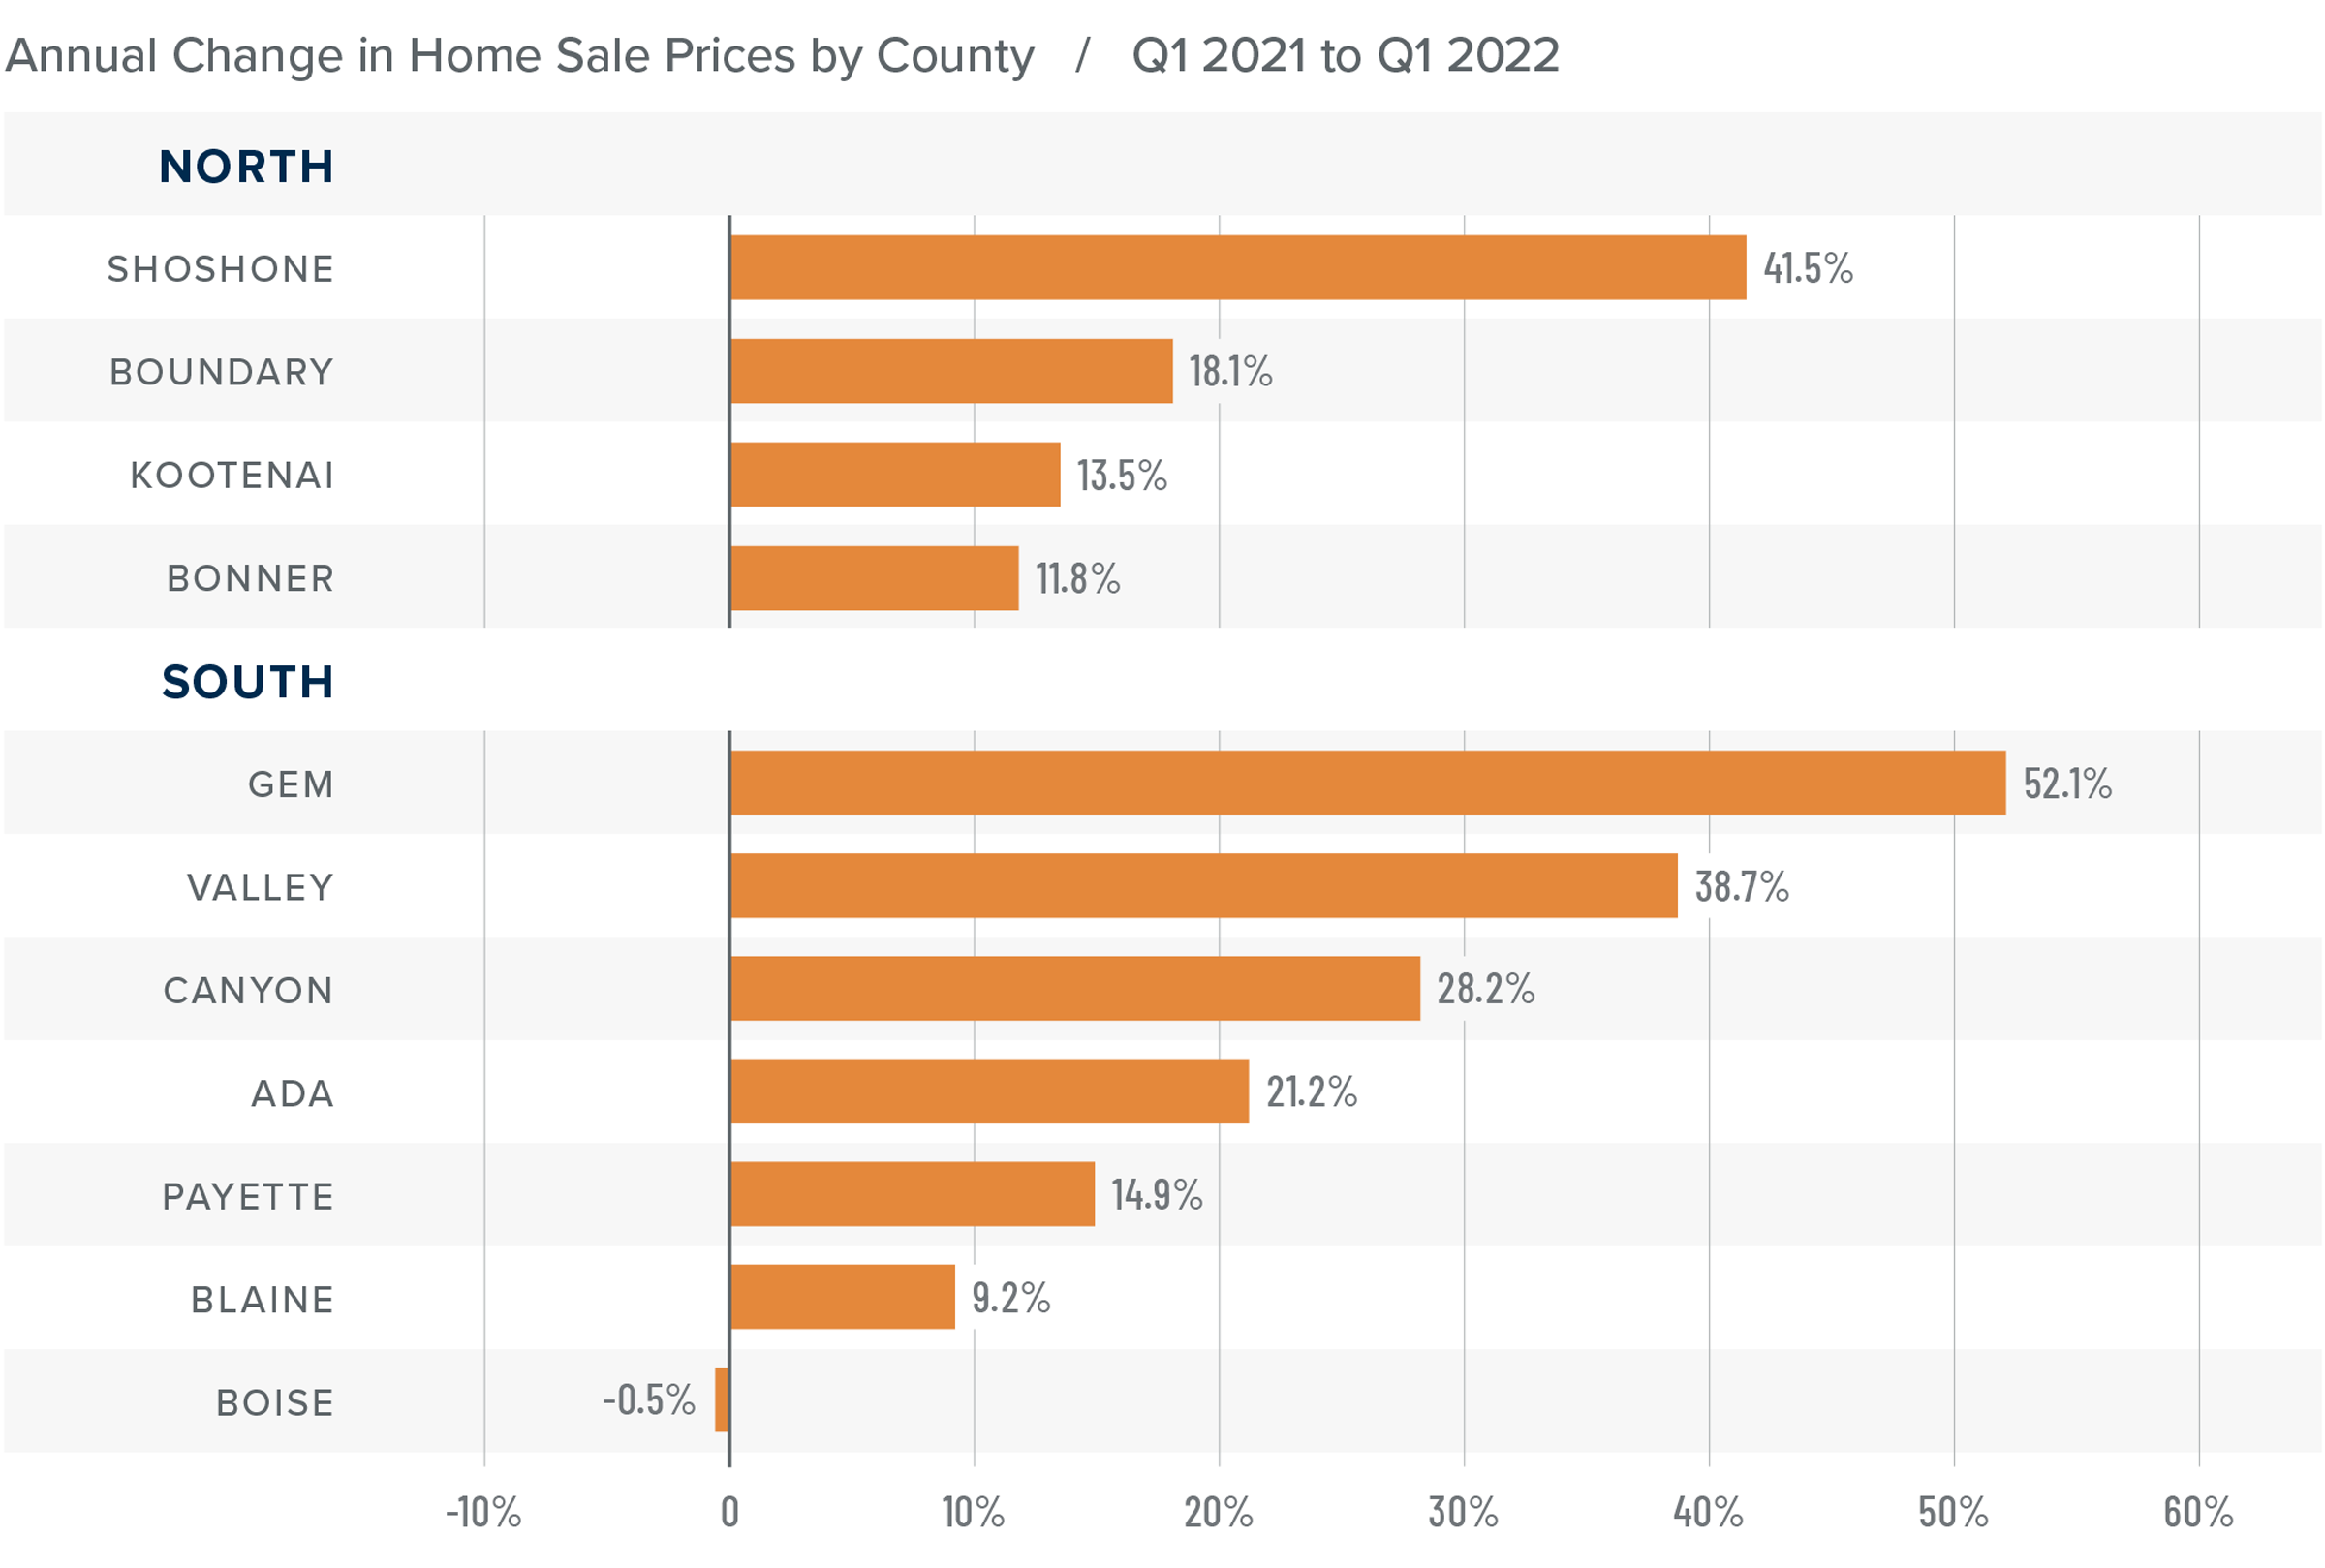 A bar graph showing the annual change in home sale prices for various counties in Idaho from Q1 2021 to Q1 2022.